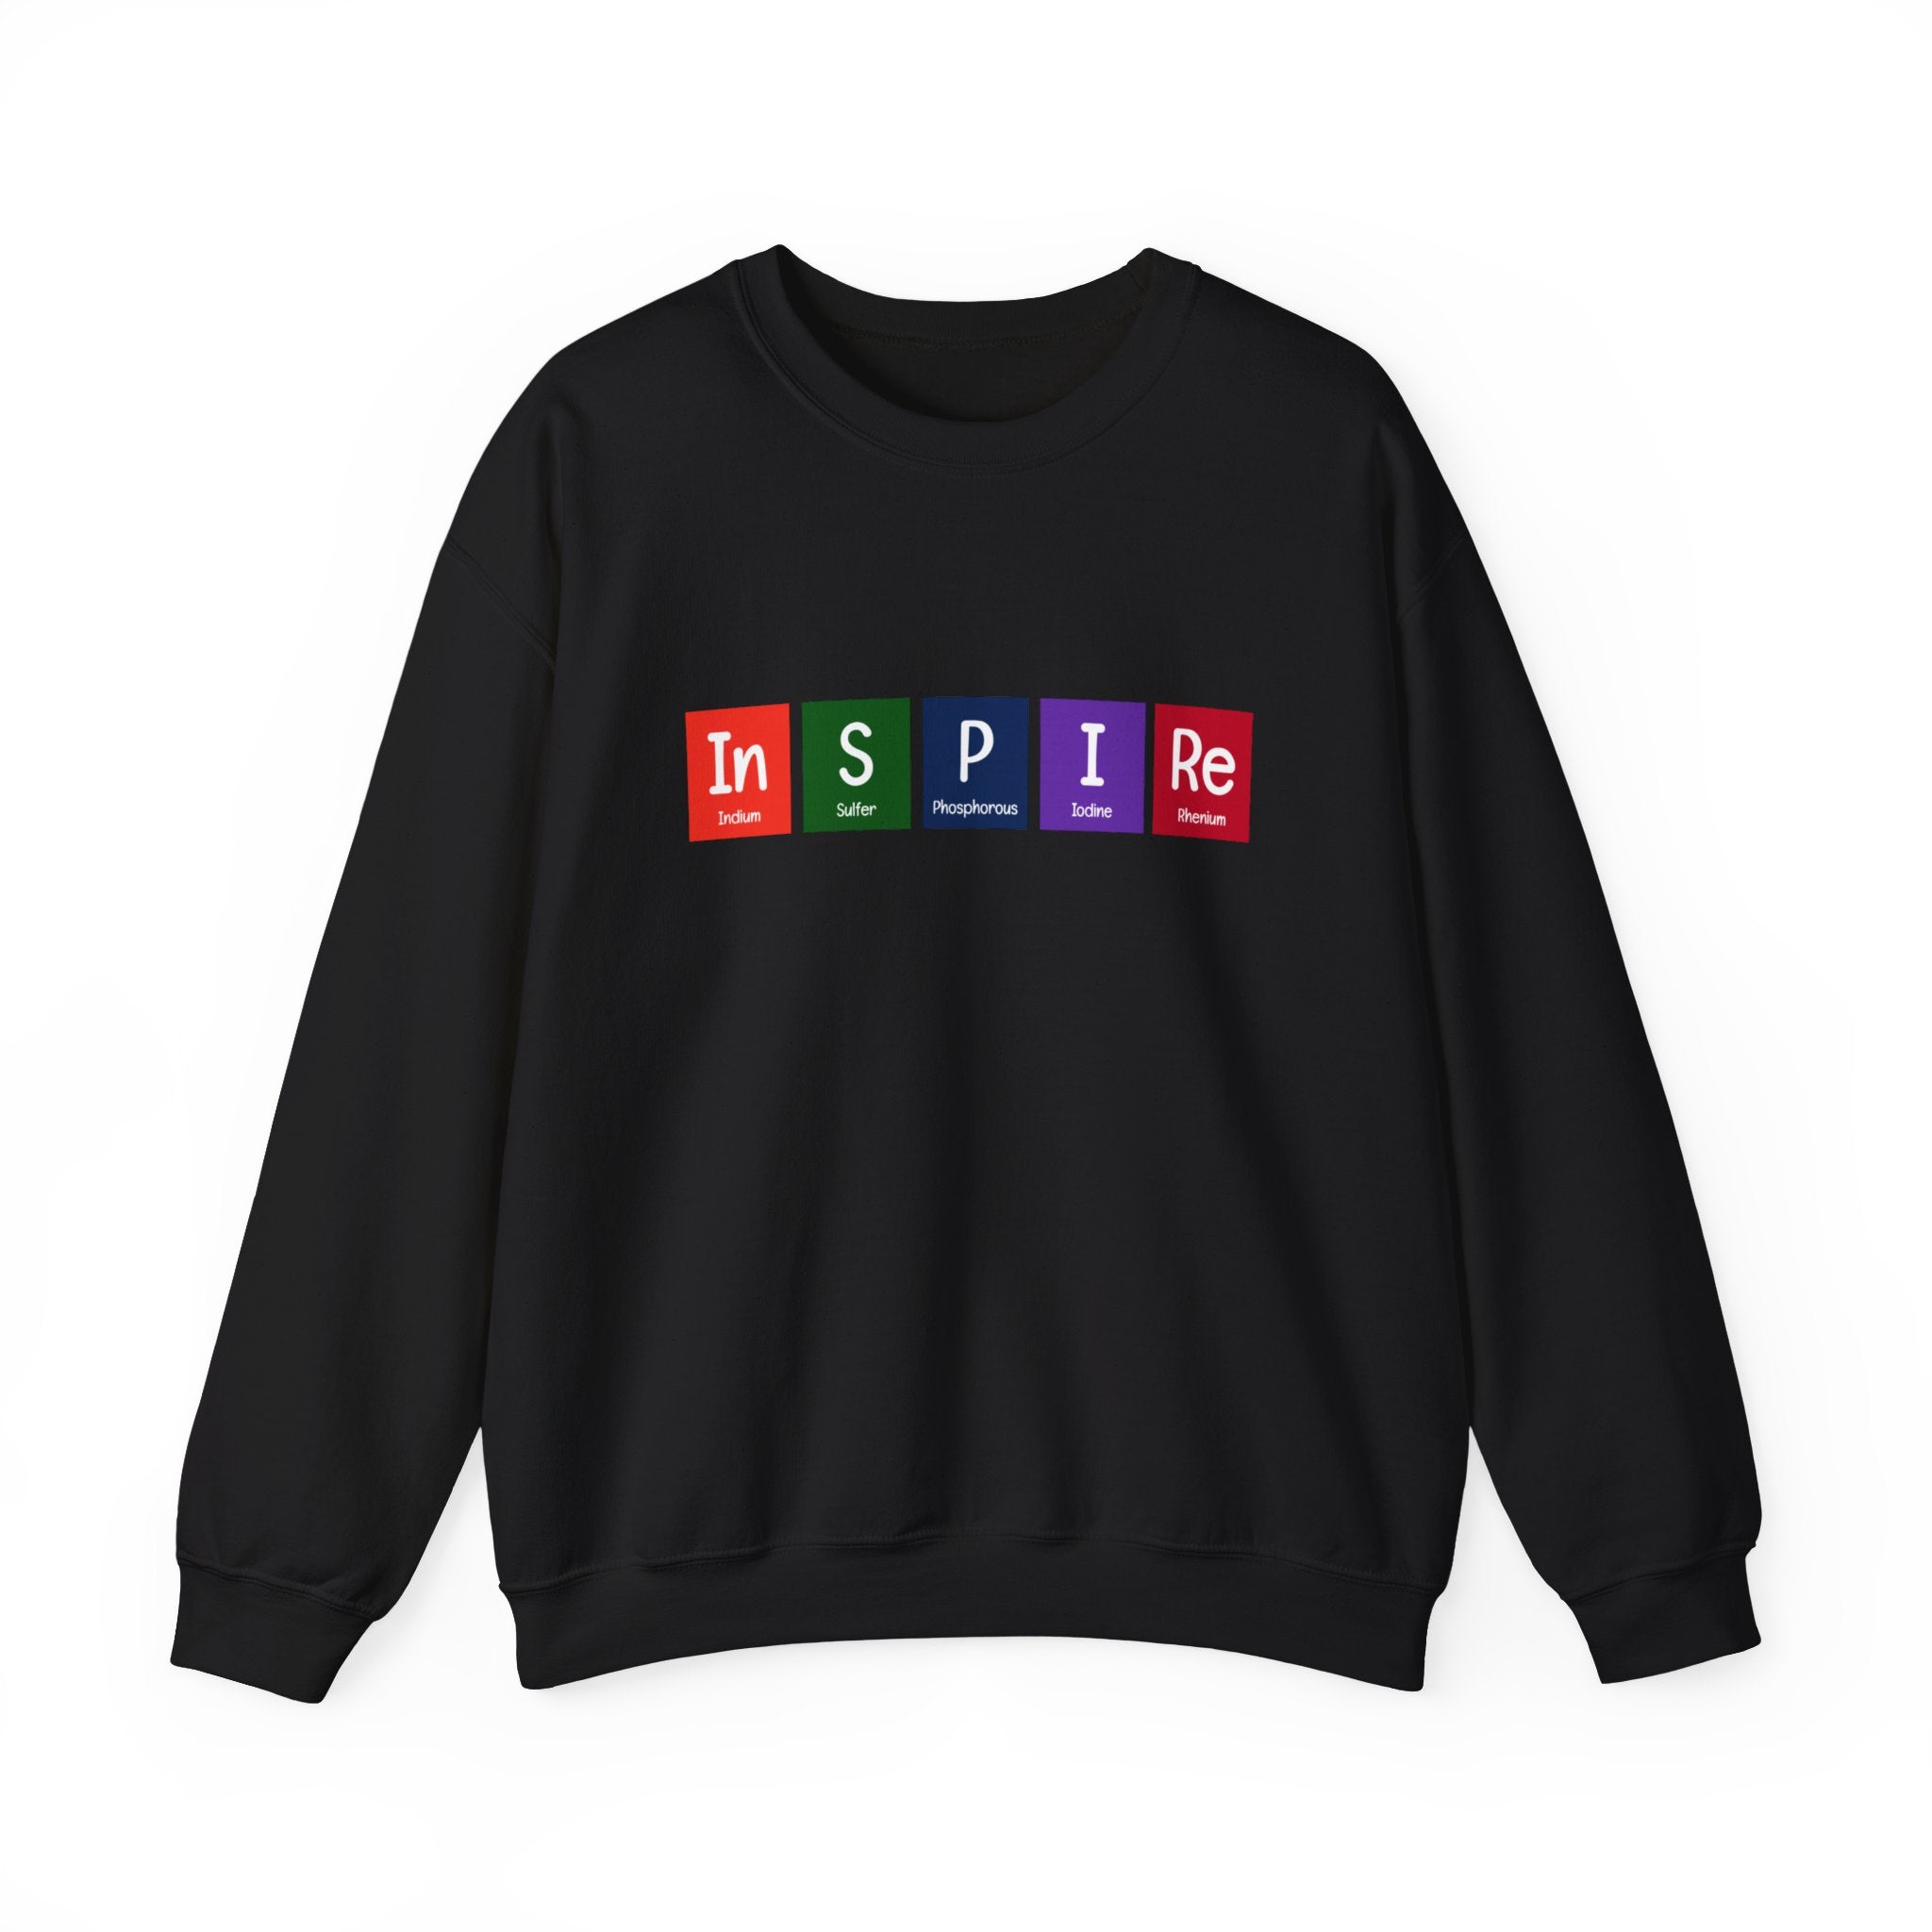 A cozy black In-S-P-I-Re - Sweatshirt perfect for the colder months, featuring the word "INSPIRE" printed on the front in colorful blocks, with each letter representing words: "Initiate, Share, Procrastination, Ignore, Repeat, Enthusiasm." Stay warm and carry inspiration wherever you go.